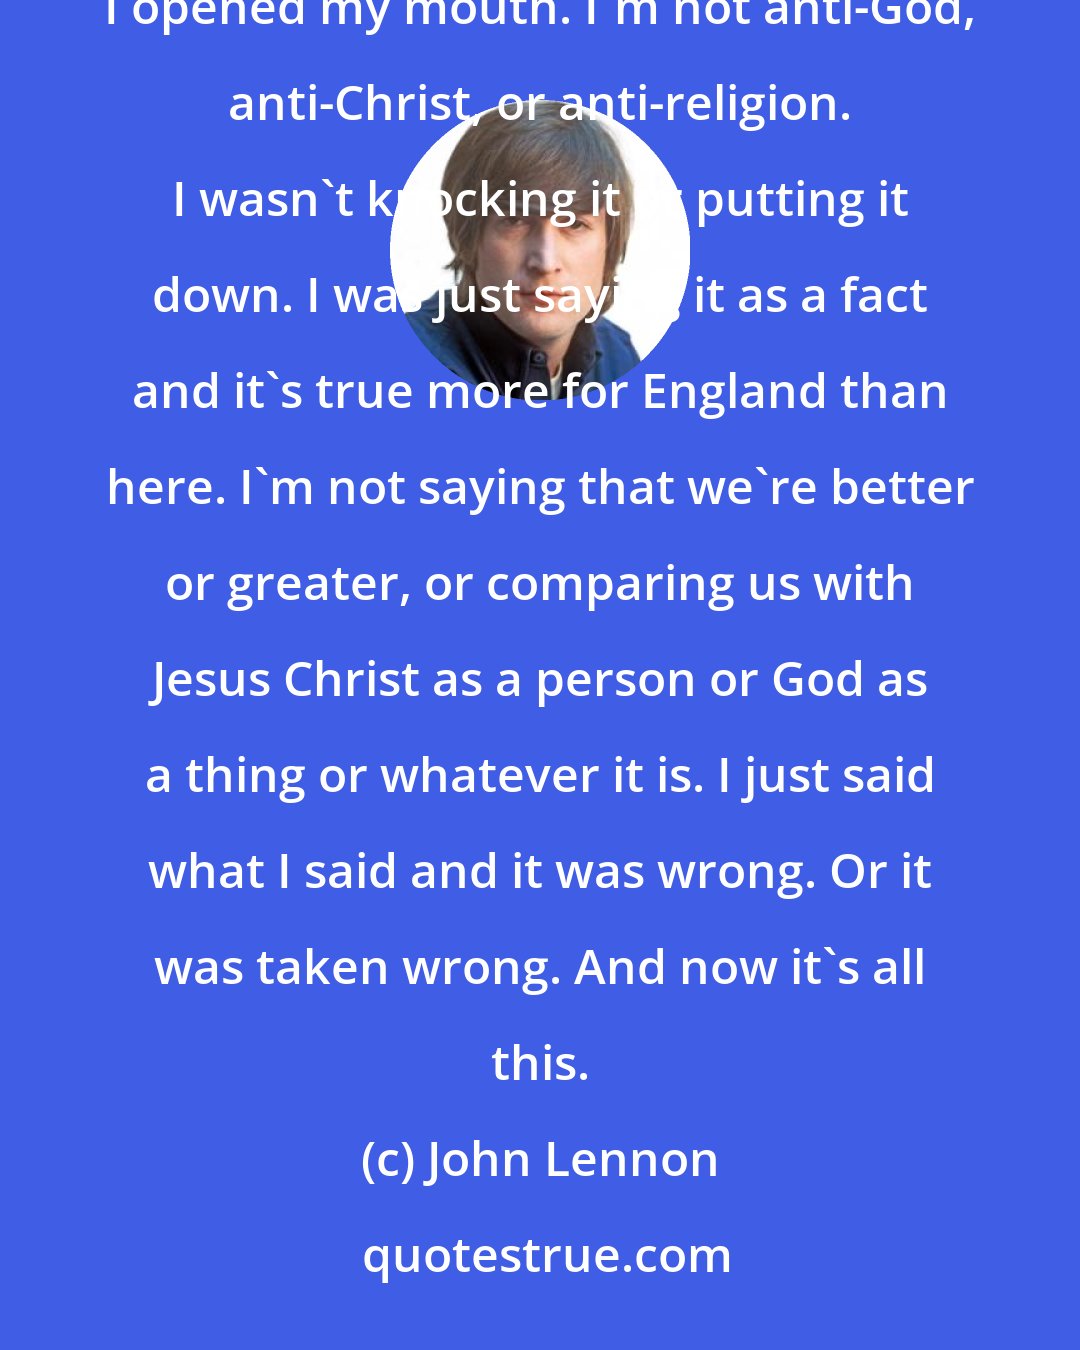 John Lennon: I suppose if I had said television was more popular than Jesus, I would have gotten away with it. I'm sorry I opened my mouth. I'm not anti-God, anti-Christ, or anti-religion. I wasn't knocking it or putting it down. I was just saying it as a fact and it's true more for England than here. I'm not saying that we're better or greater, or comparing us with Jesus Christ as a person or God as a thing or whatever it is. I just said what I said and it was wrong. Or it was taken wrong. And now it's all this.